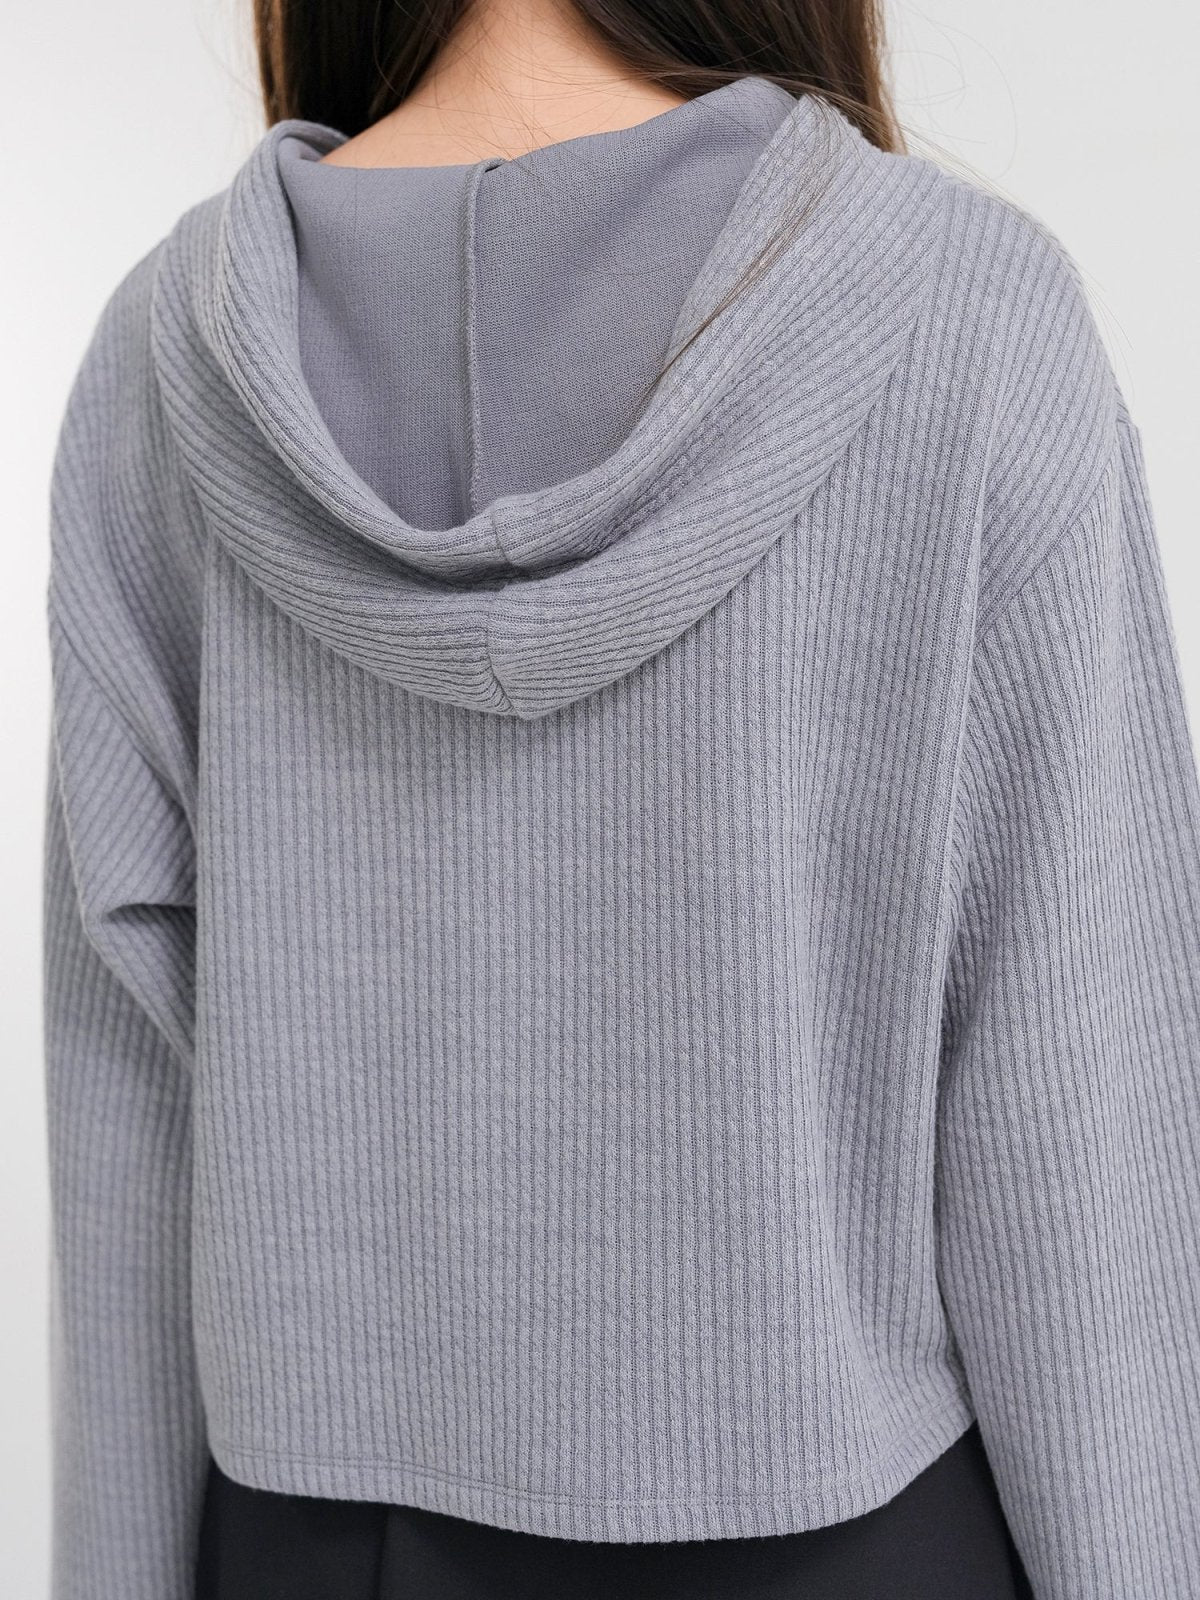 Hooded Knit Top - DAG-DD1367-24StoneBlueS - Stone Blue - S - D'zage Designs